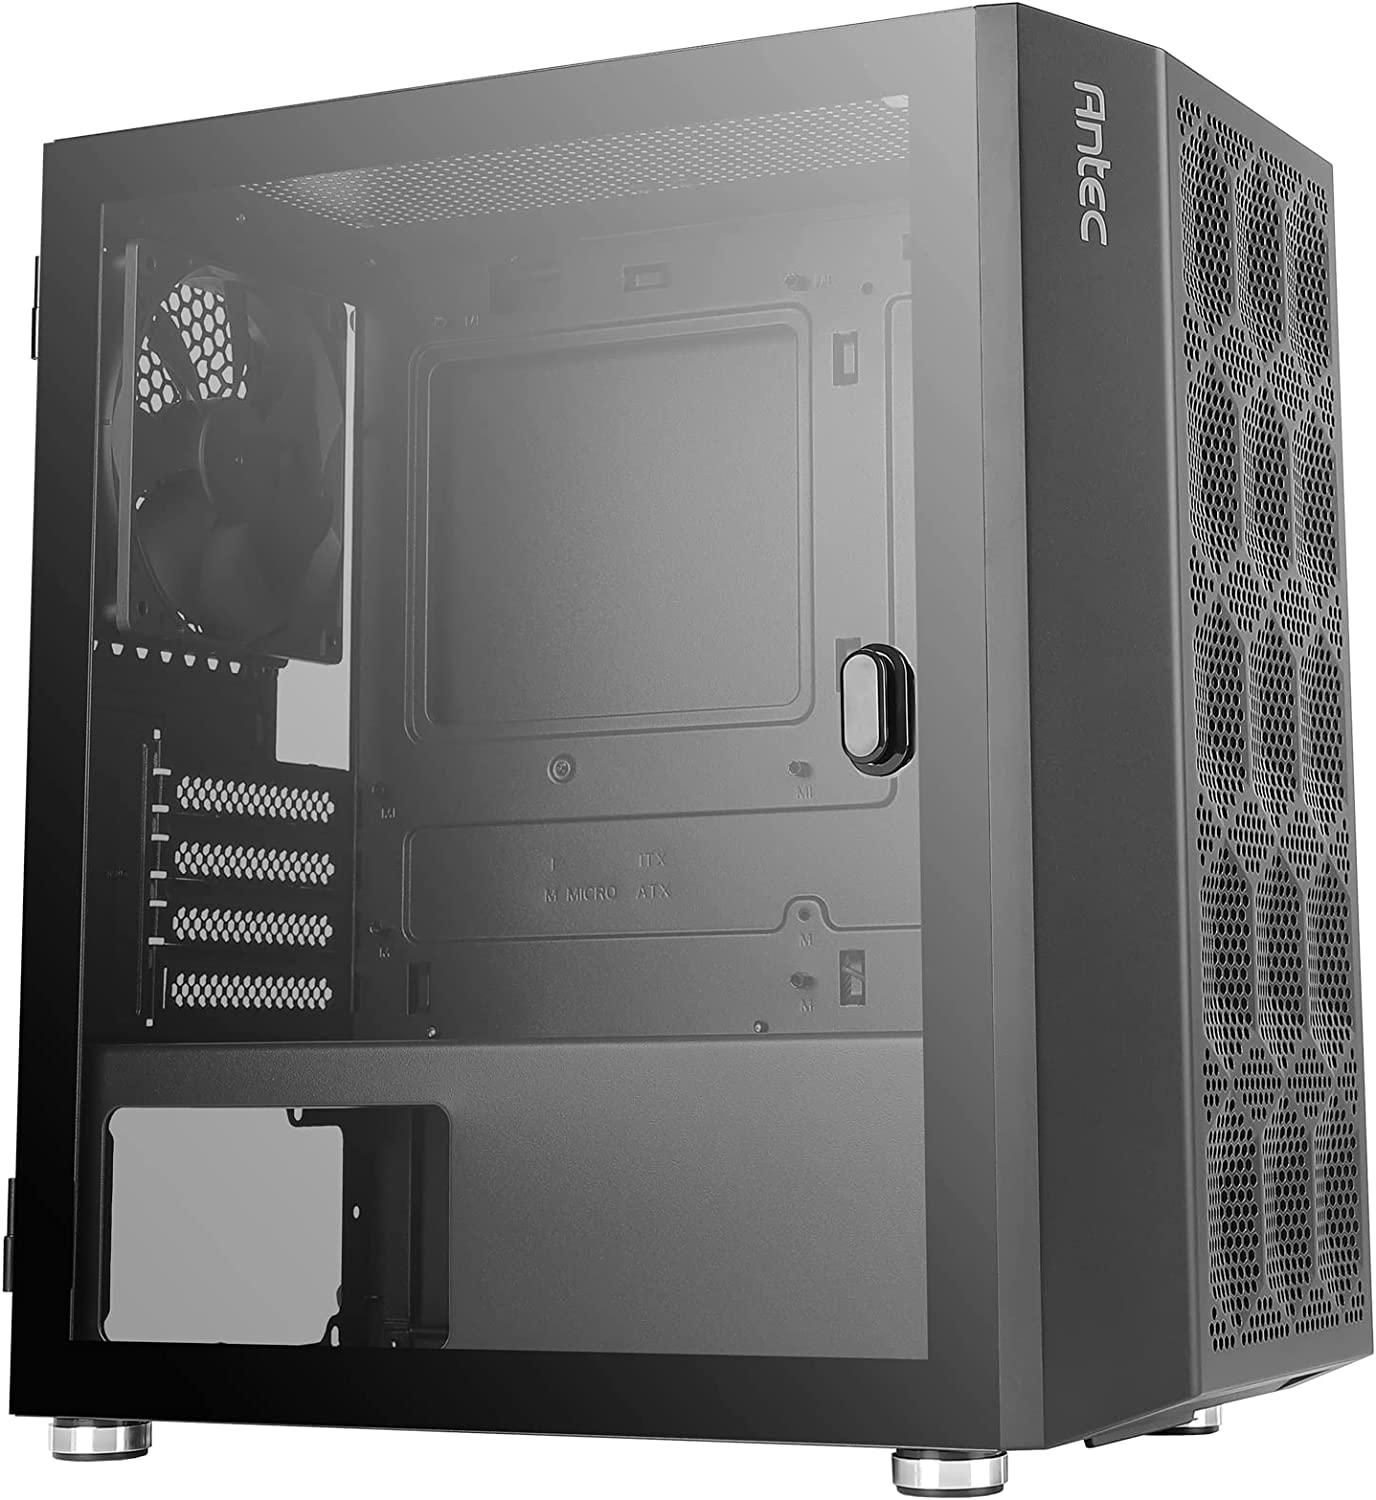 Antec NX200 M, Micro-ATX Tower, Mini-Tower Computer Case with 120mm Rear Fan Pre-Installed, Mesh Design in Front Panel Ventilated Airflow, NX Series, Black